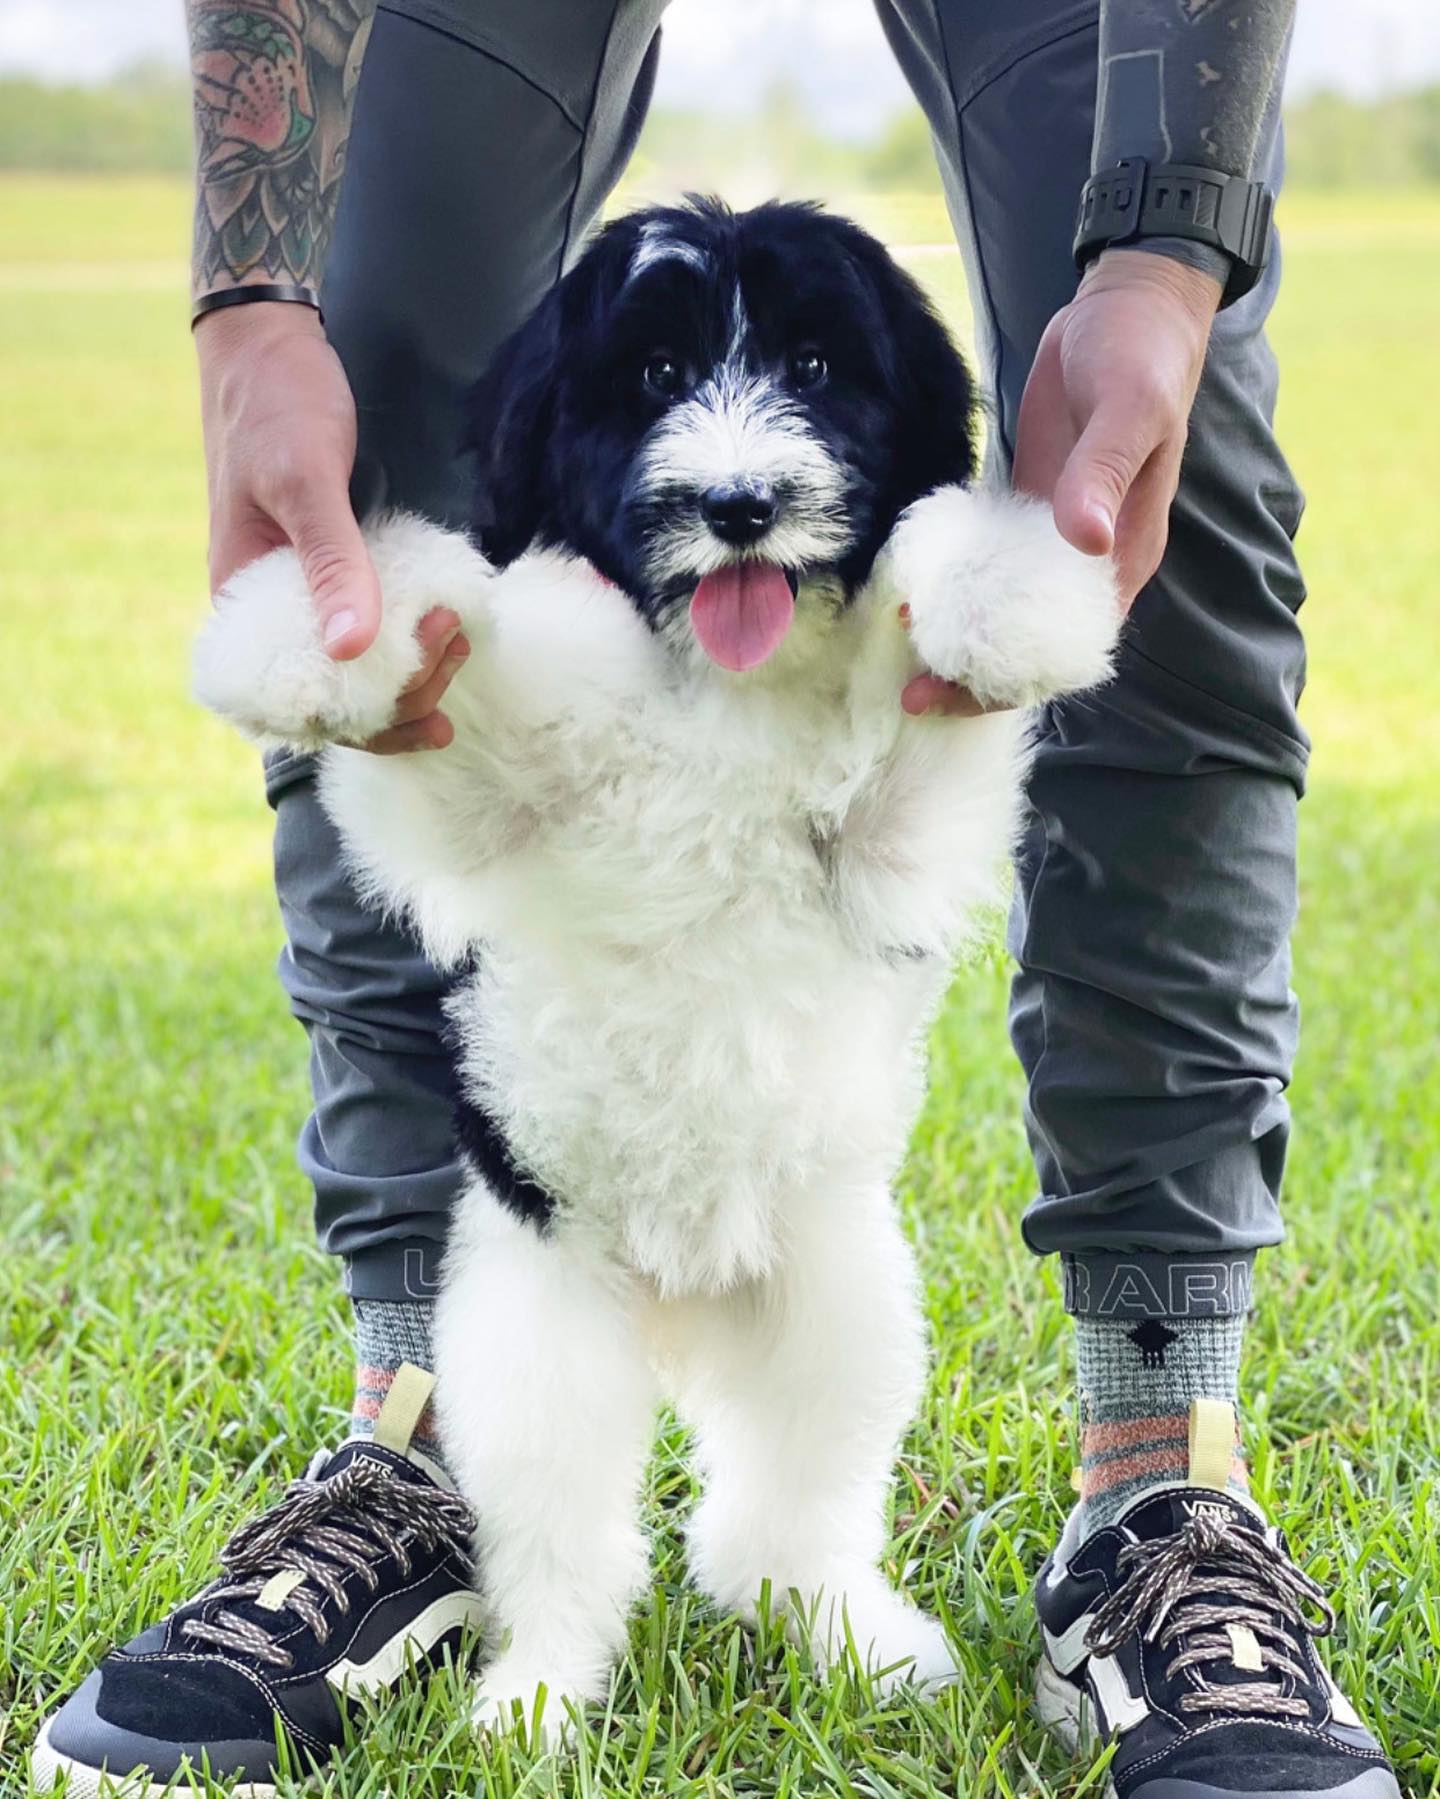 Black and white parti golden doodles are one of a kind. They are a doodle breed that is a mix of two different colors. They are also one of the most popular breeds, because they are so beautiful and unique.